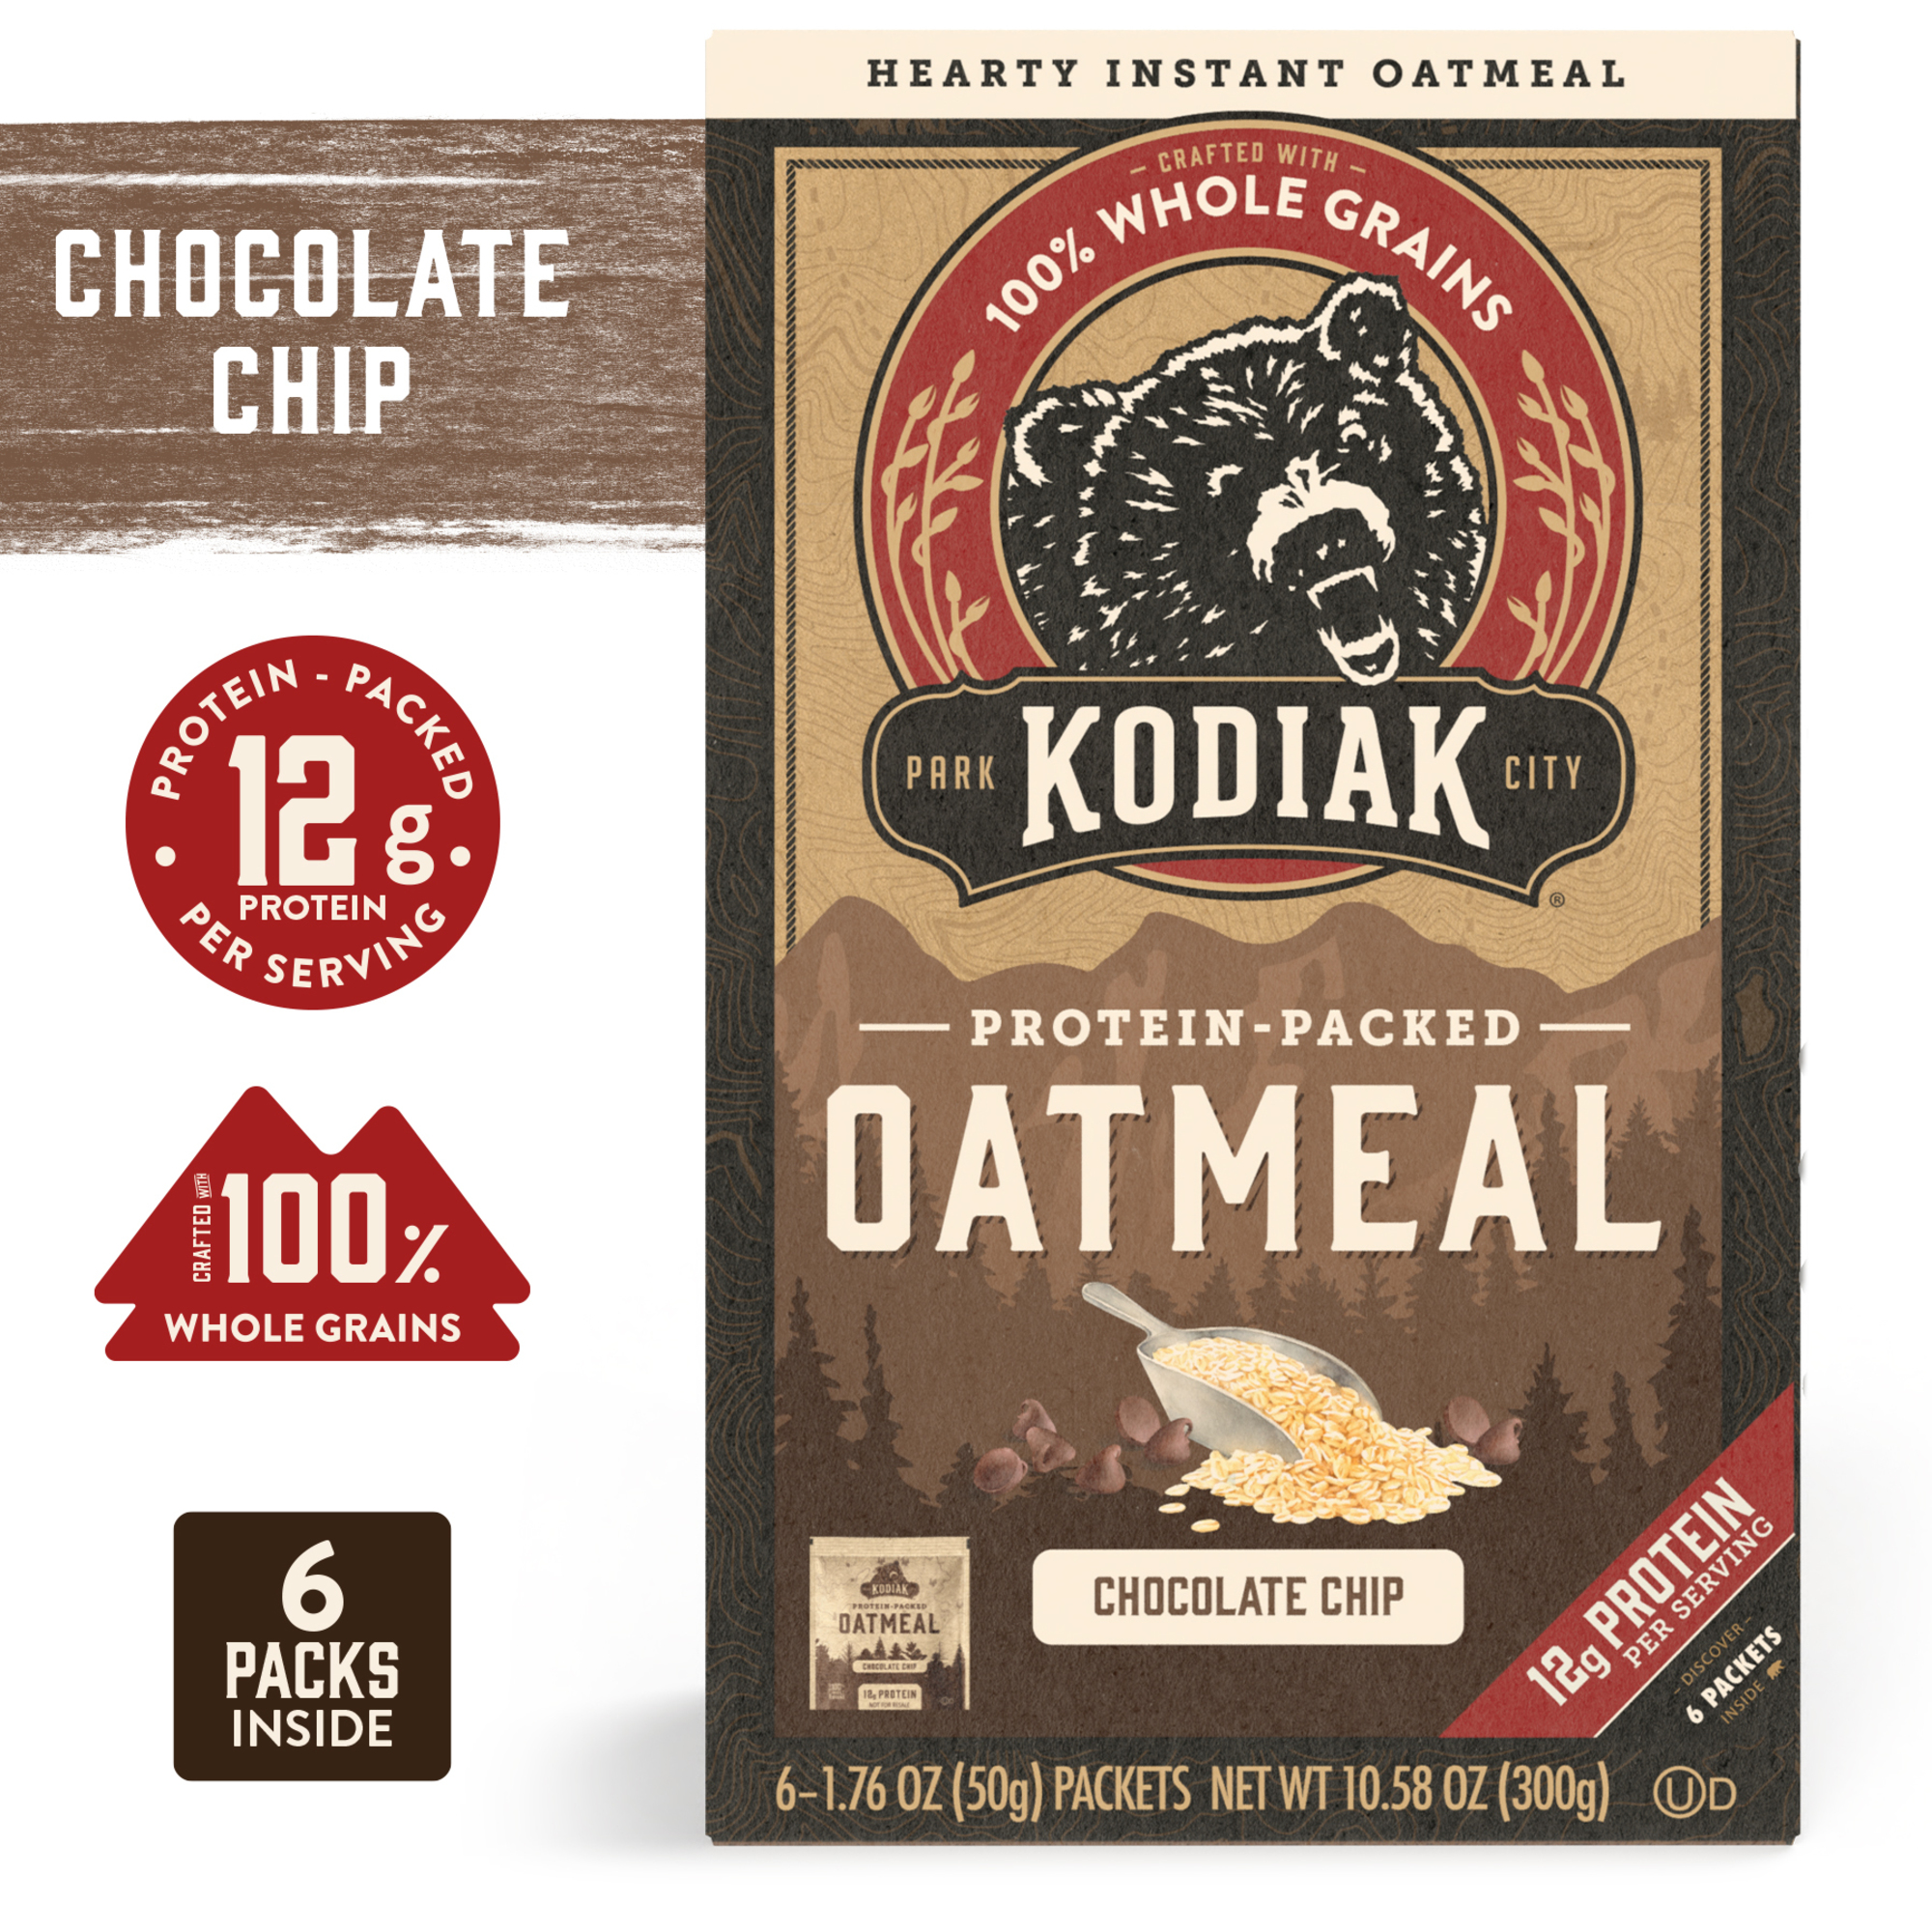 Kodiak Protein-Packed Chocolate Chip Instant Oatmeal, 1.76 oz, 6 Packets - image 2 of 9